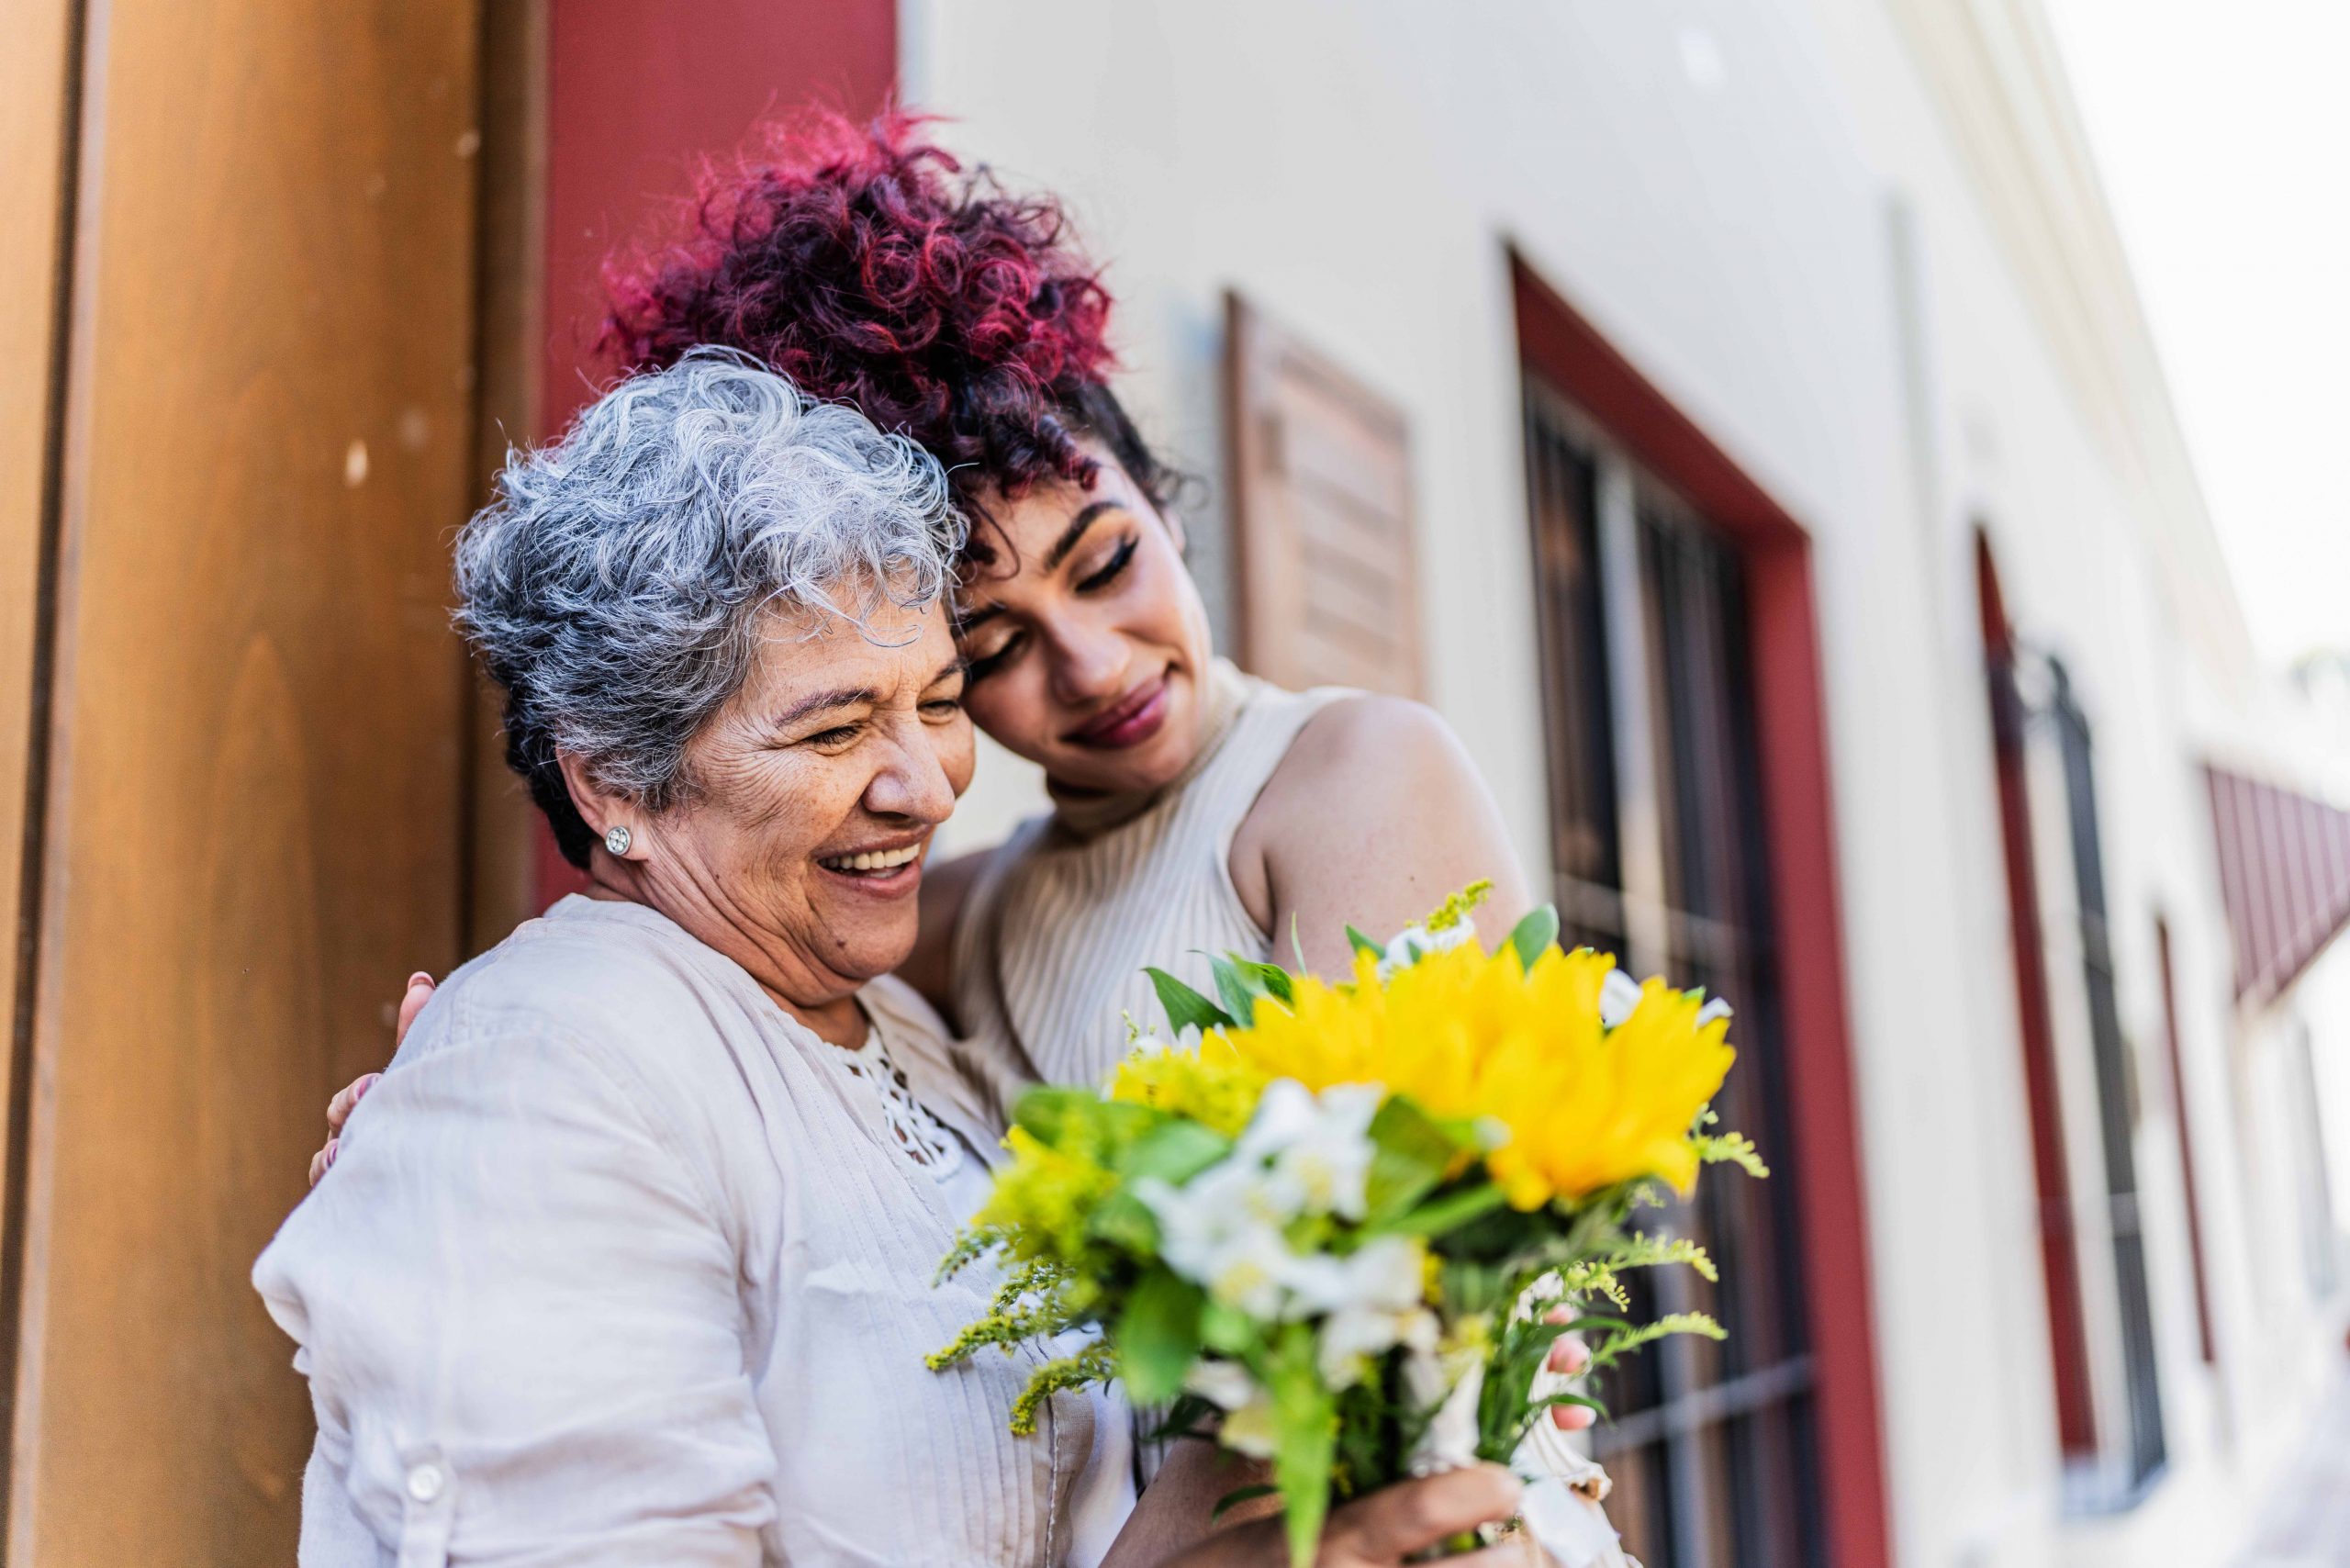 Mother and daughter in embrace outside holding flowers.